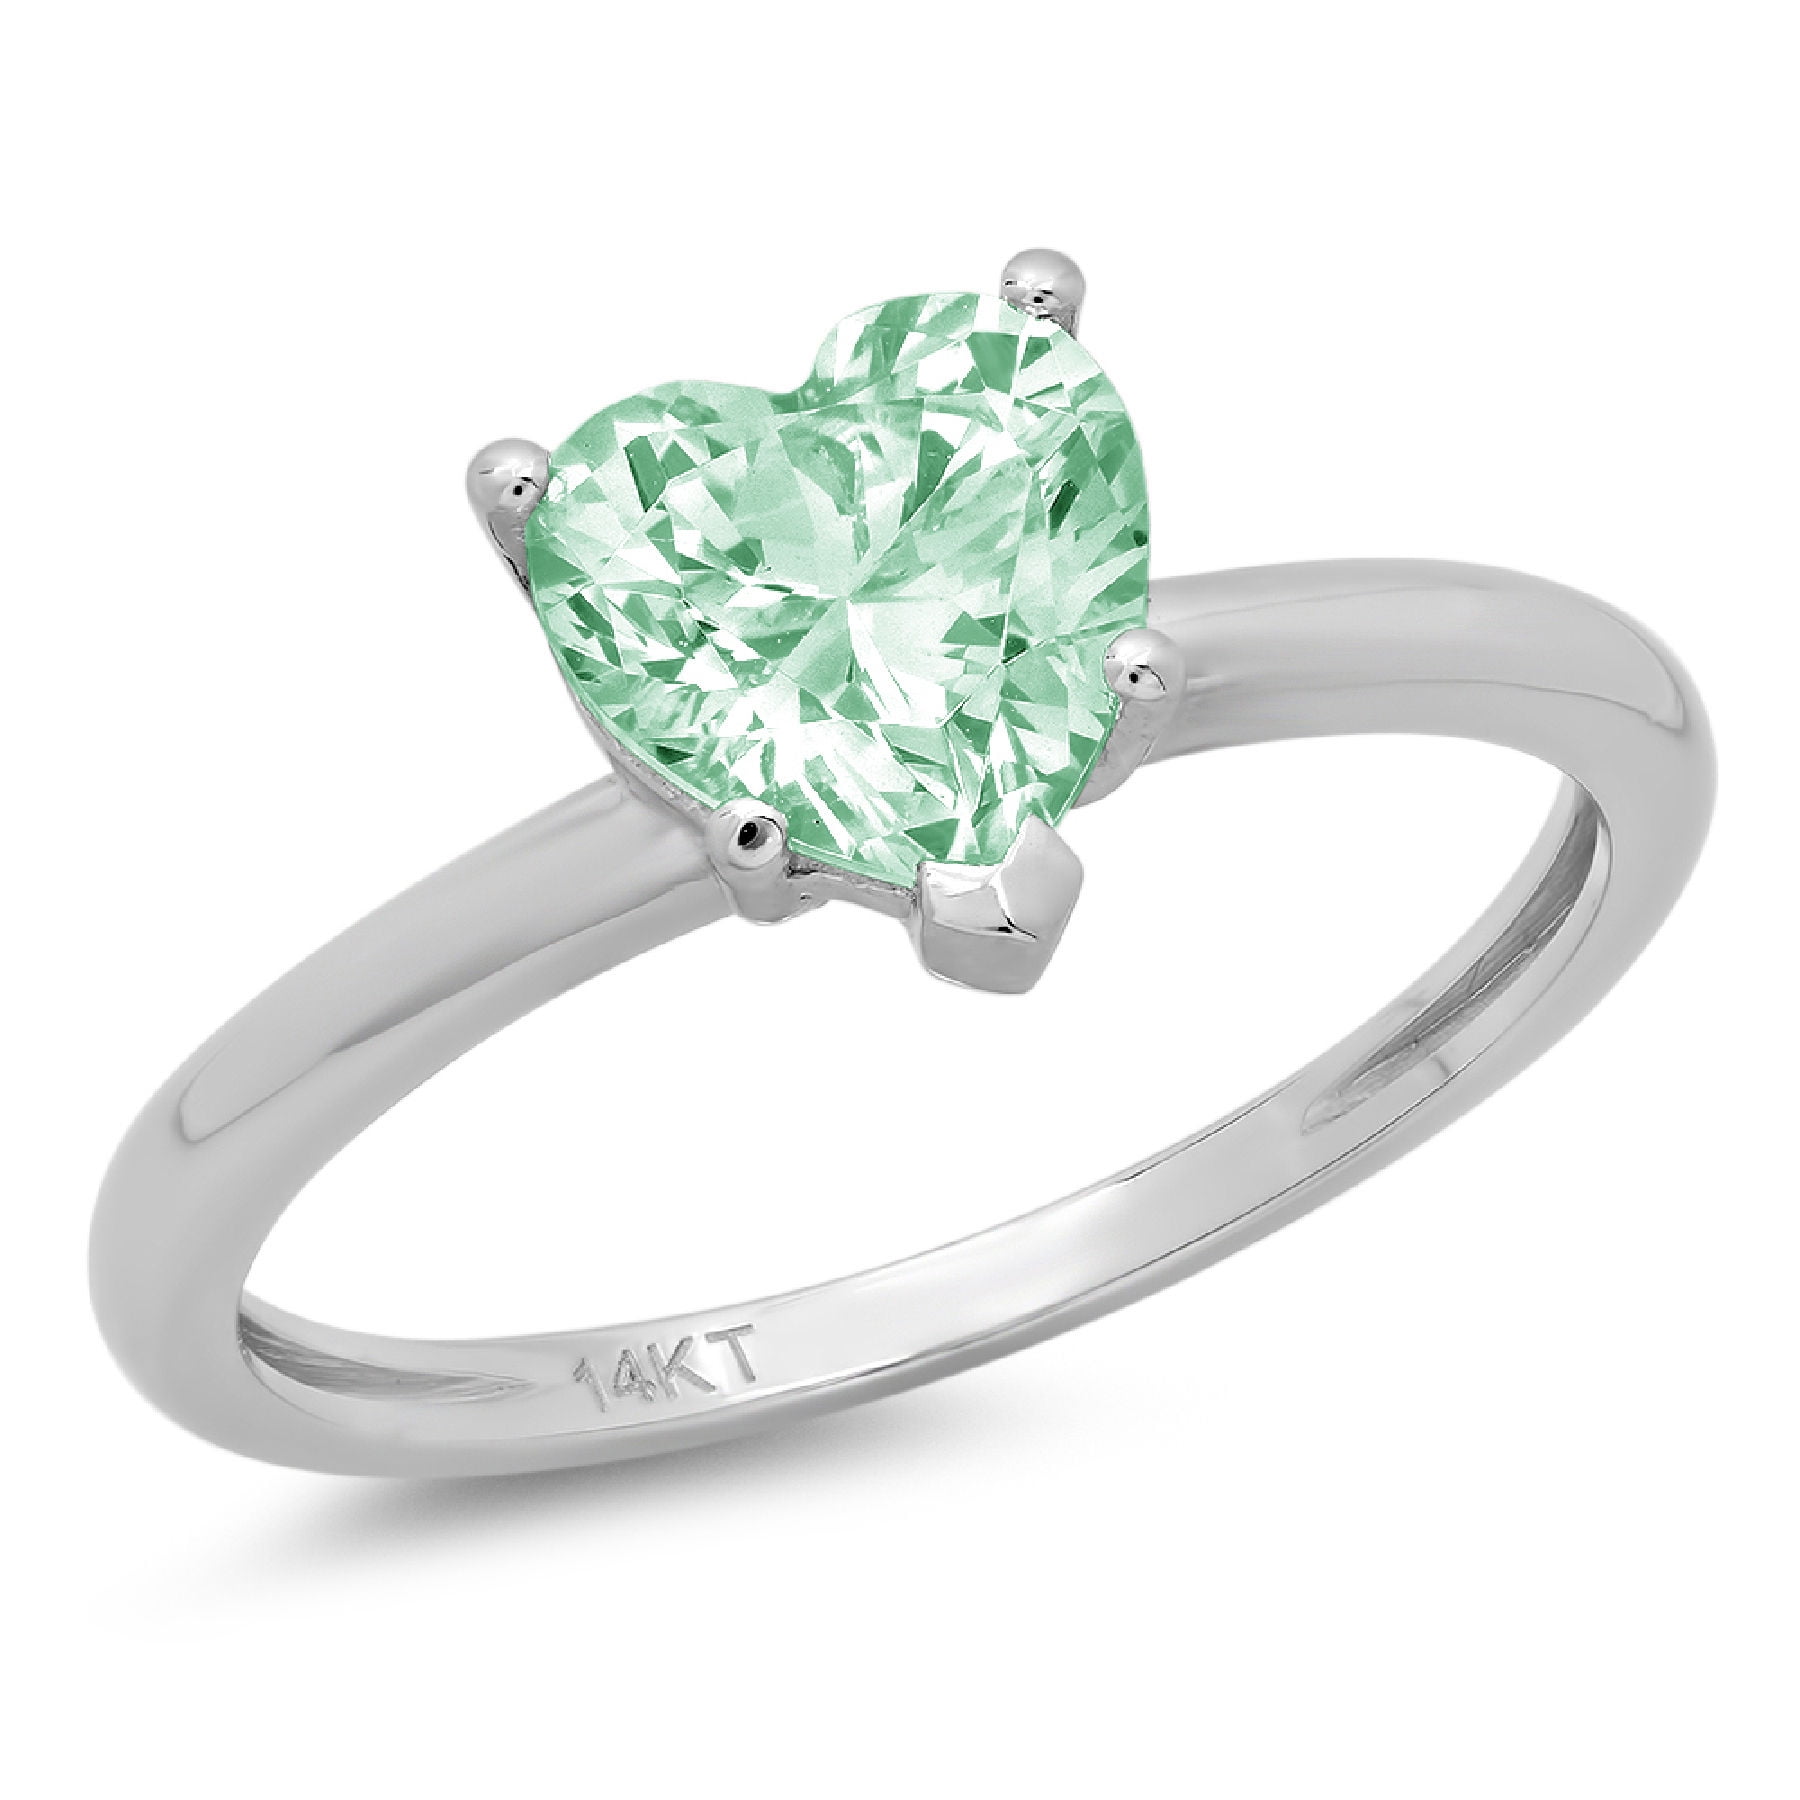 Details about   Emerald Green Halo Wedding Ring Heart Engagement Ring Valentine's Day Gift Her 